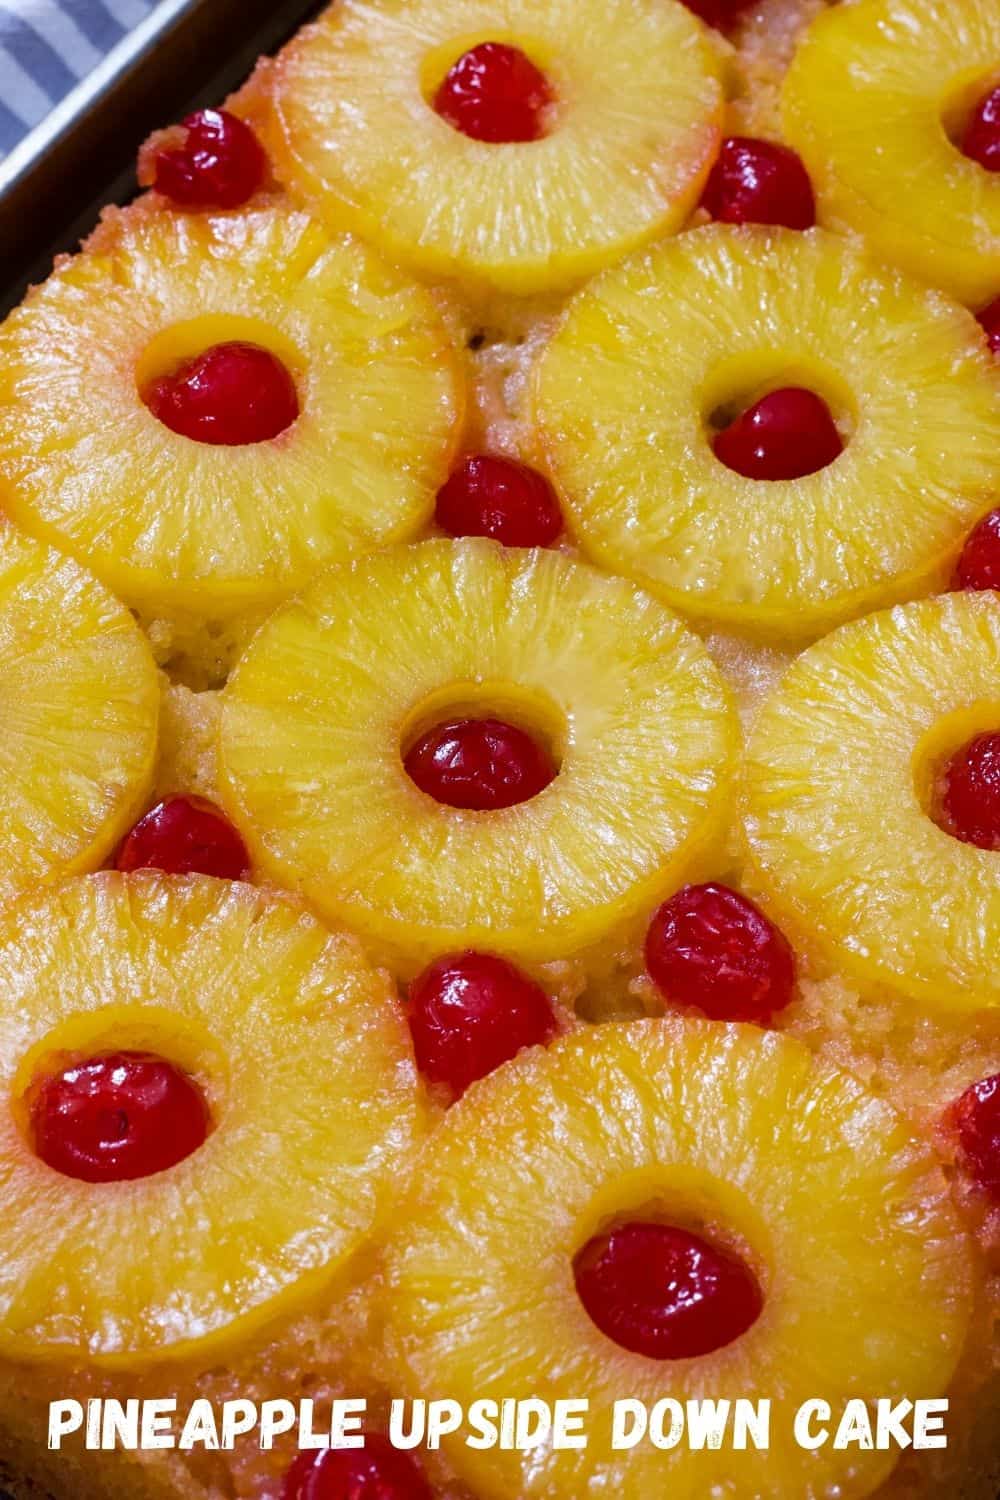 Pineapple Upside Down Cake recipe features pineapple and maraschino cherries and transforms boxed cake into an easy and special treat!